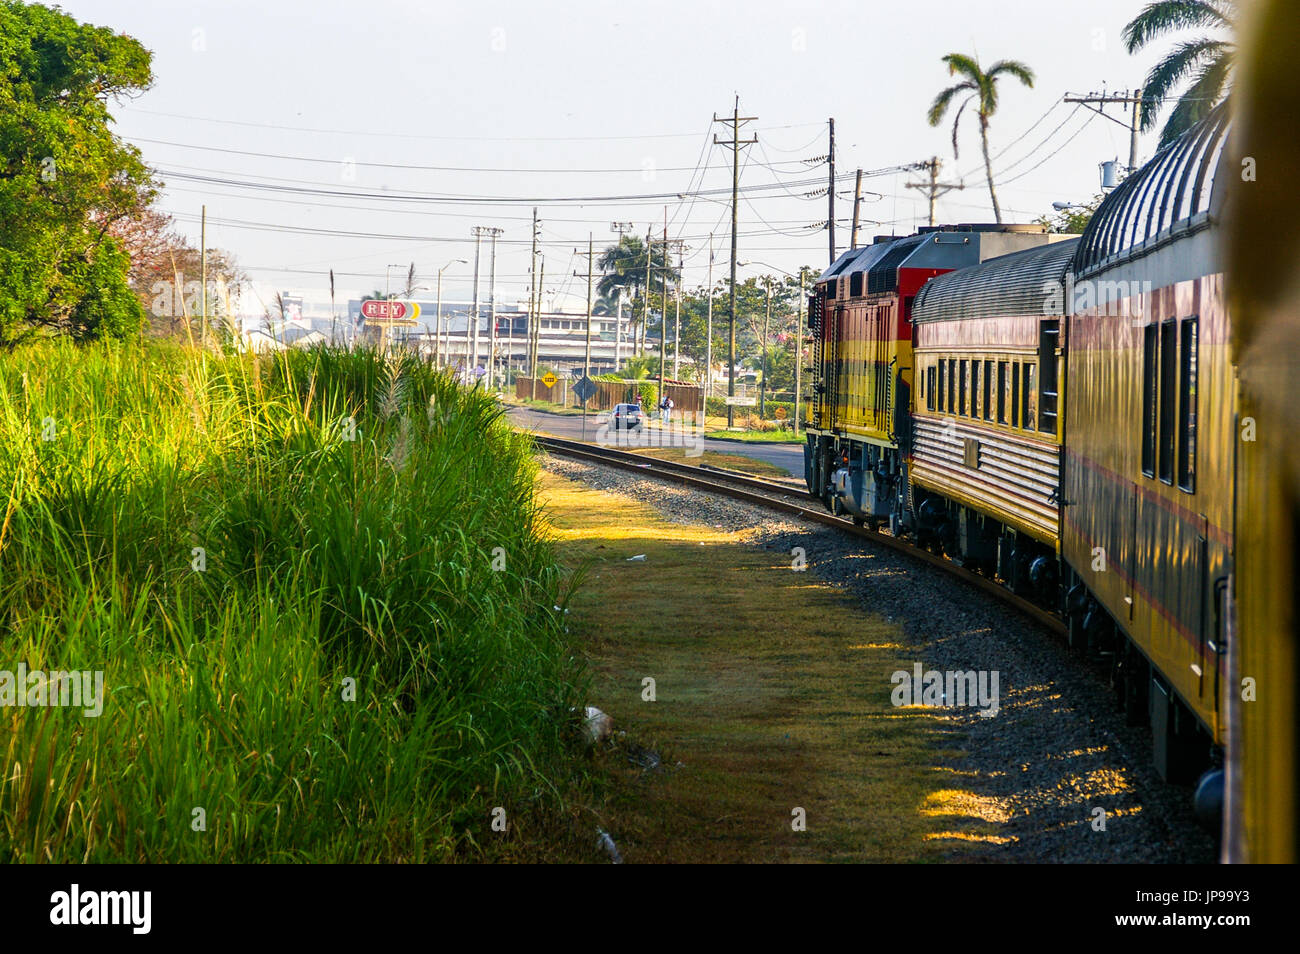 Images of the panama canal railway train approaching Colon Stock Photo